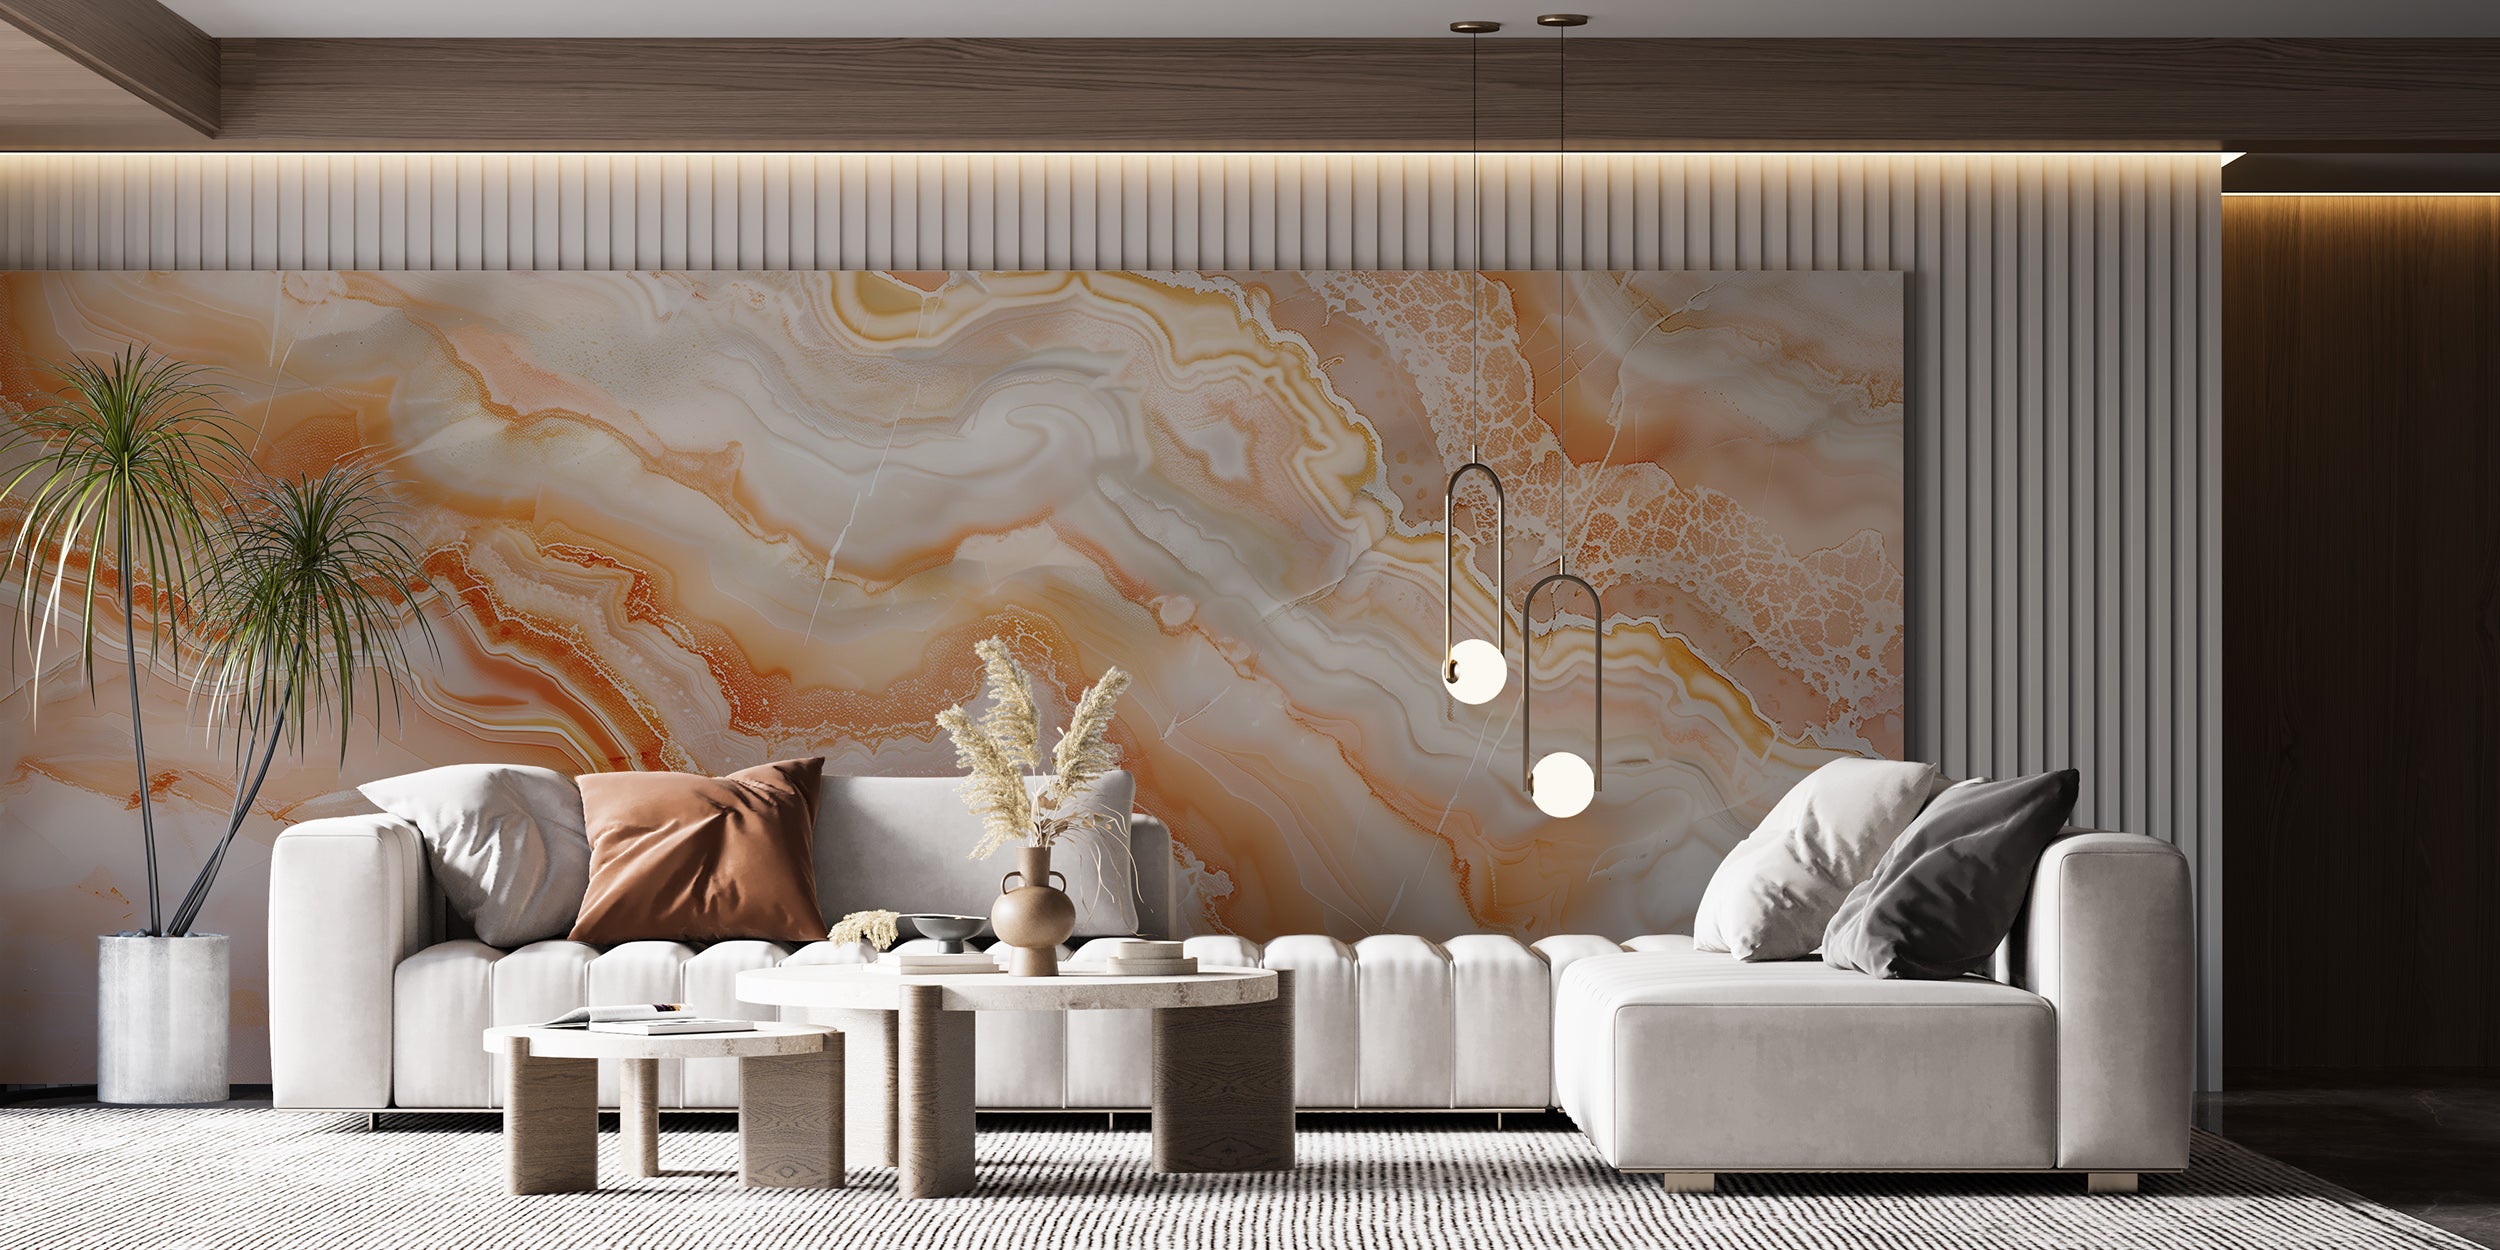 Orange Marble Mural, Peel and Stick Abstract Accent Wall Wallpaper, Removable Peach Marble Art, Alcohol Ink Decor